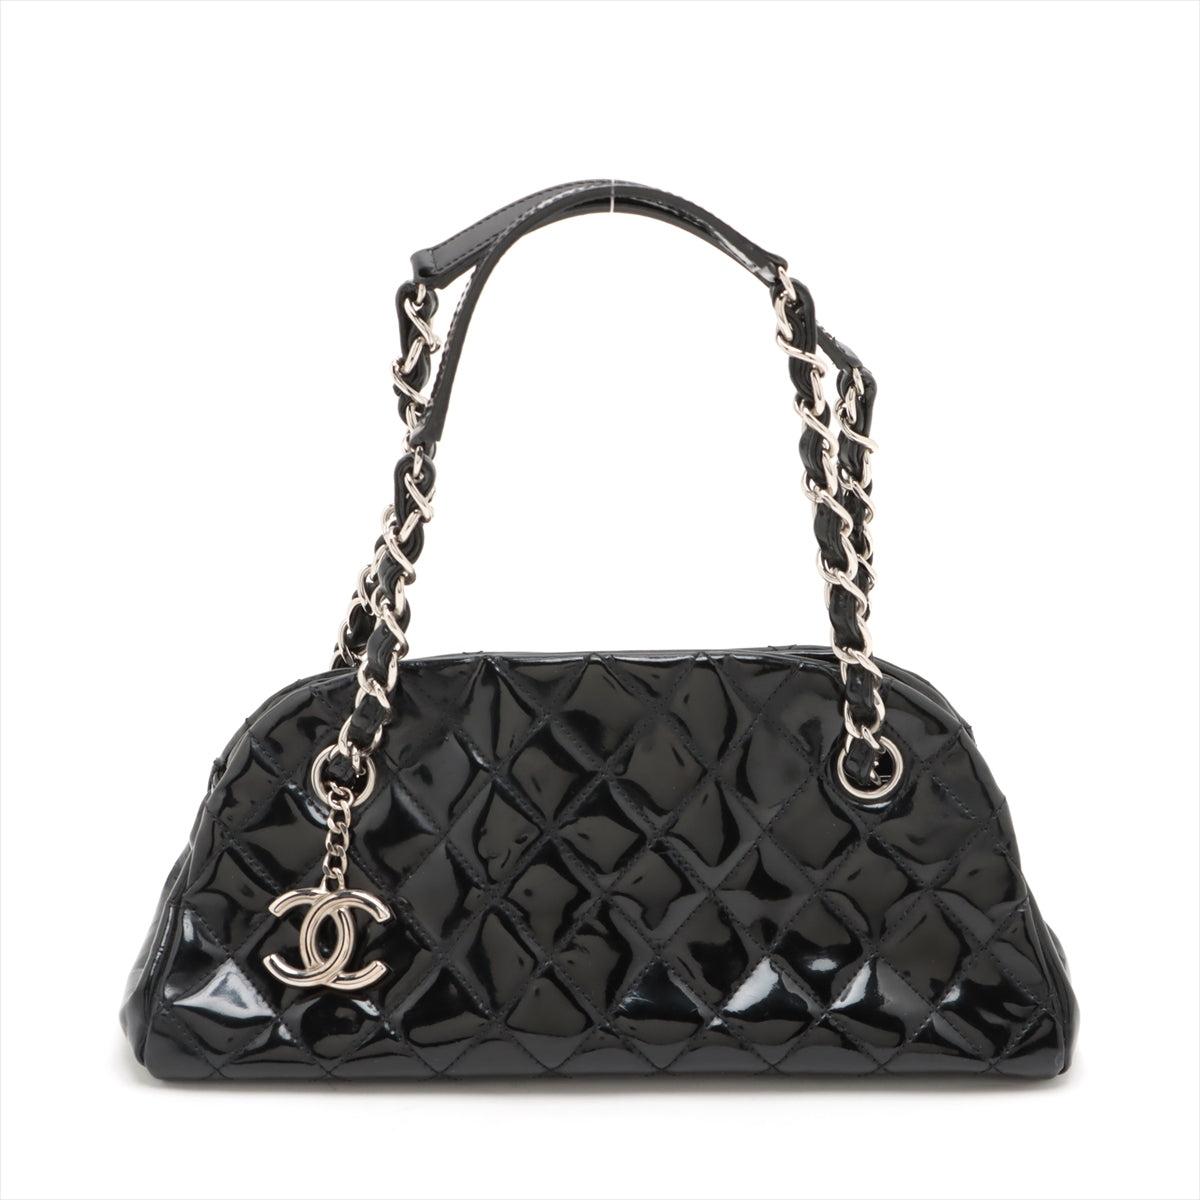 Chanel Mademoiselle Patent leather Chain shoulder bag Black Silver Metal fittings 14XXXXXX